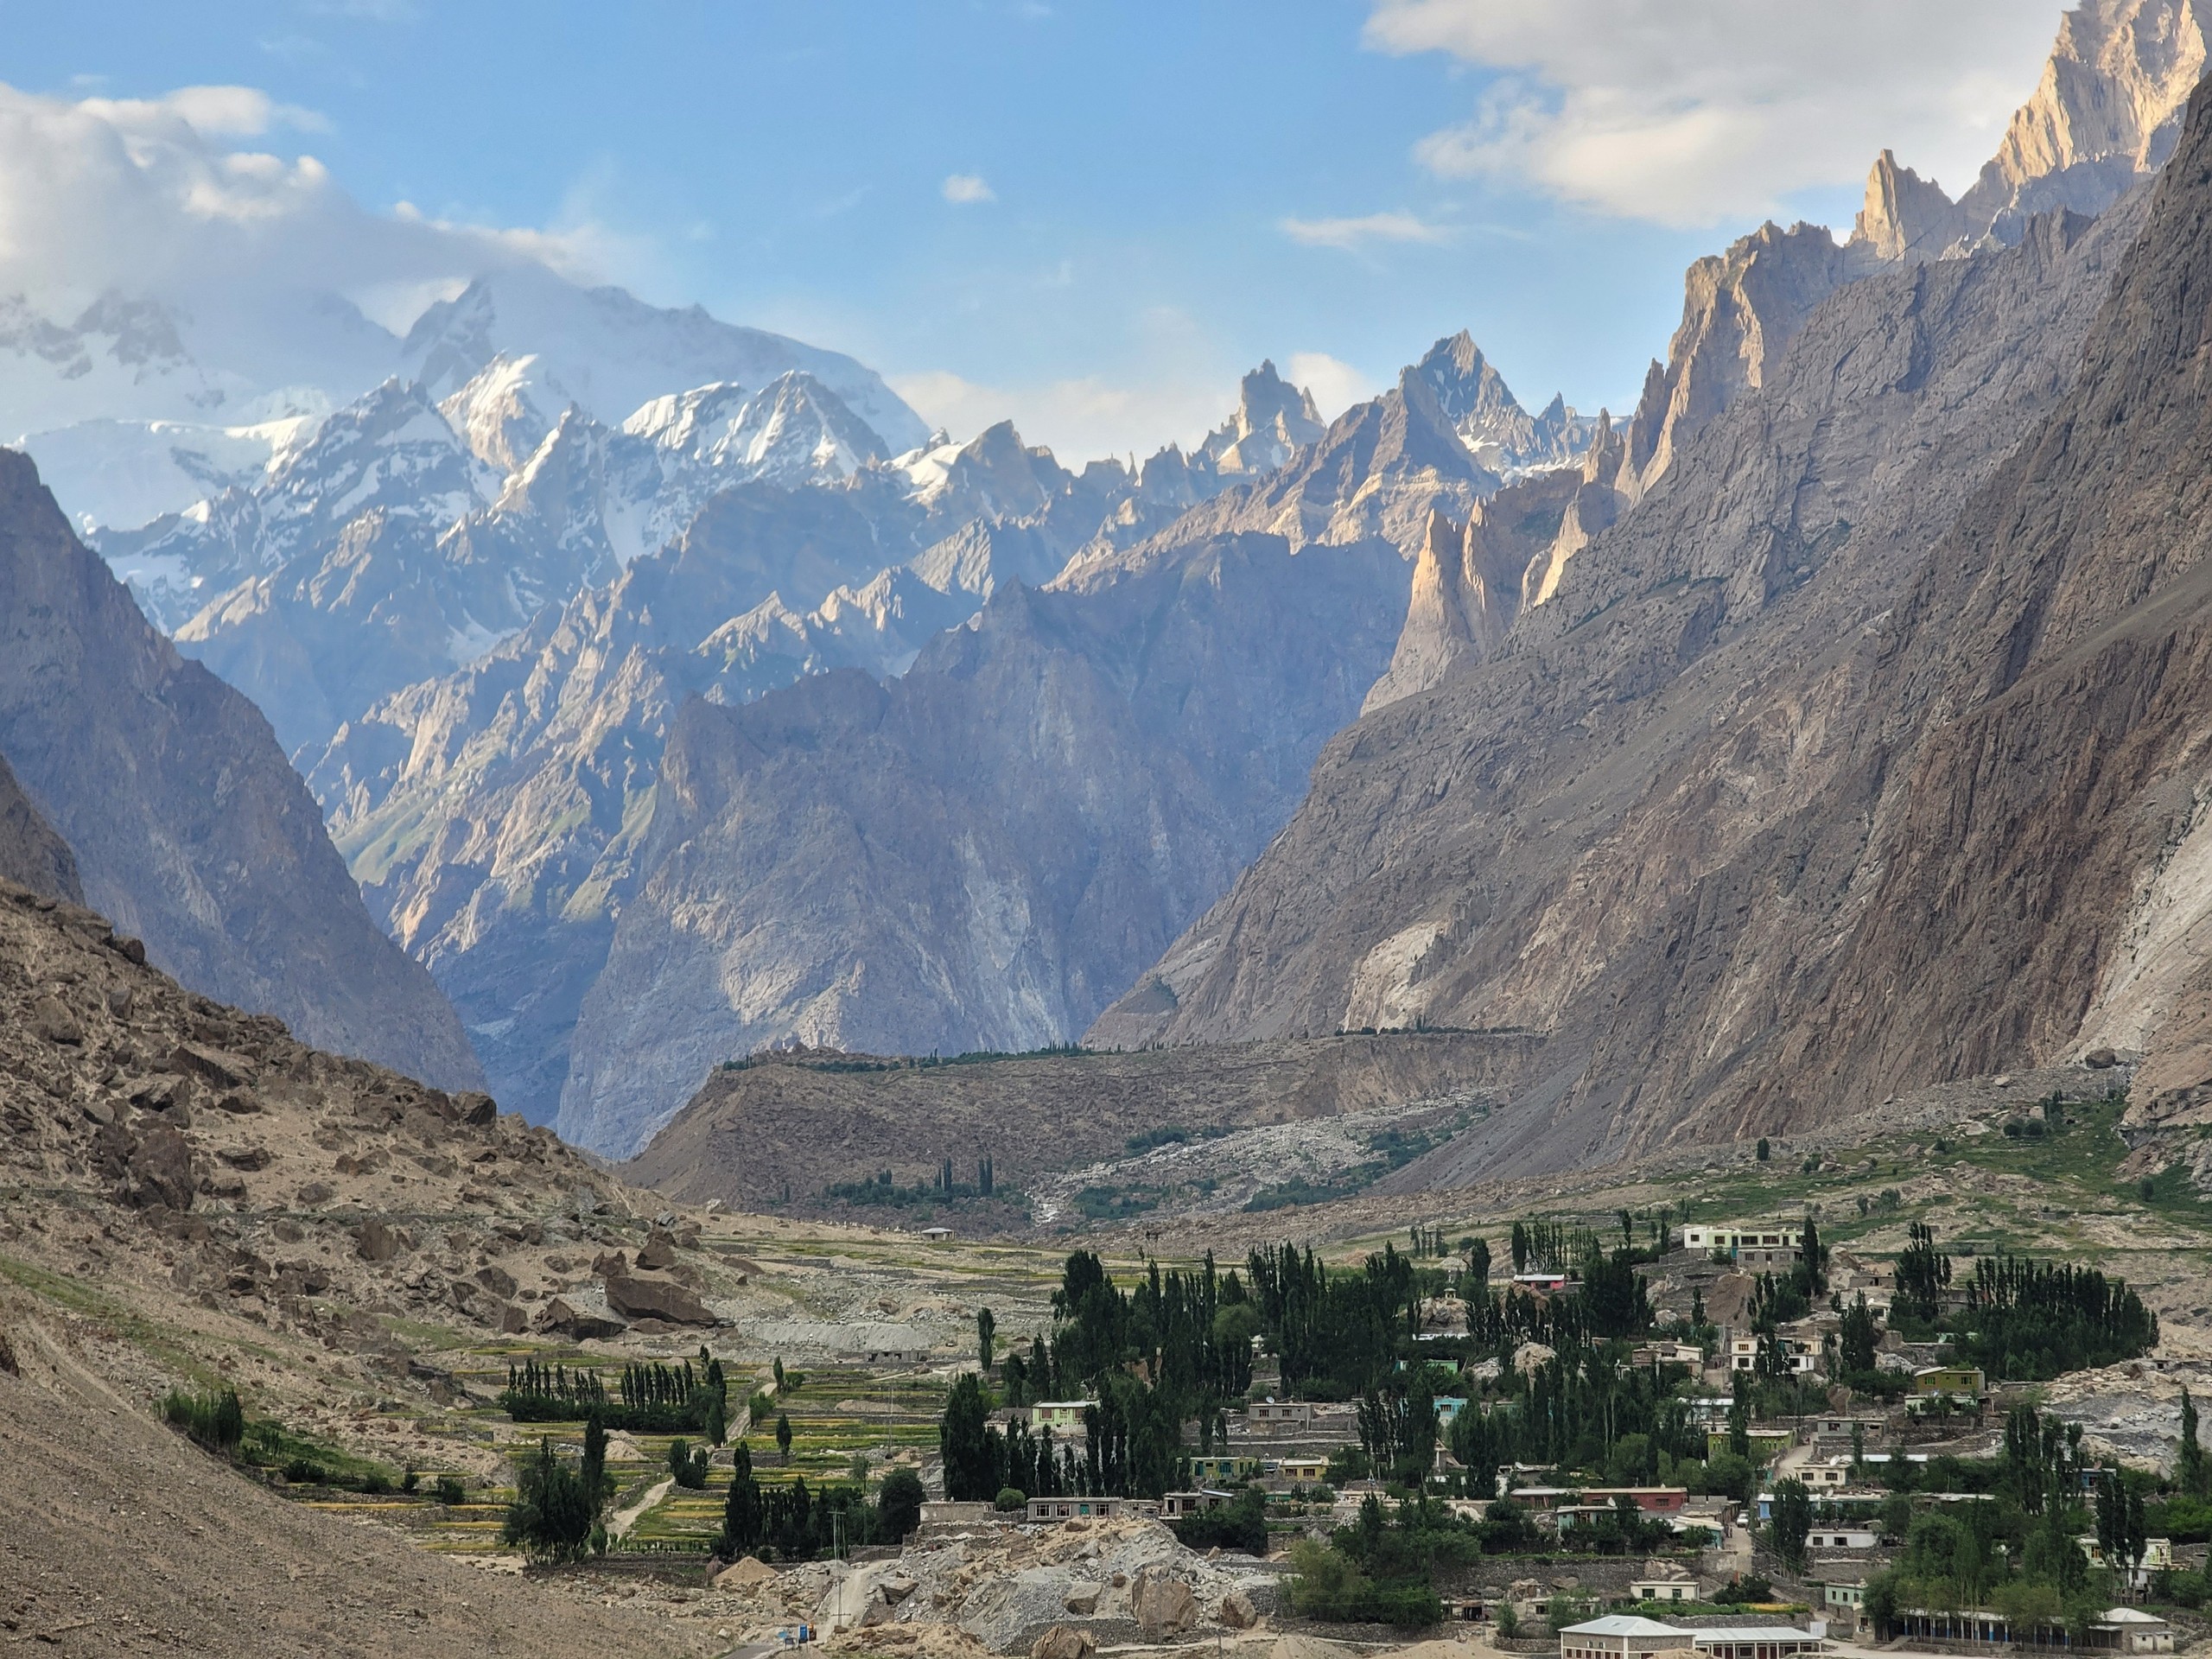 Kanday Valley views in Pakistan